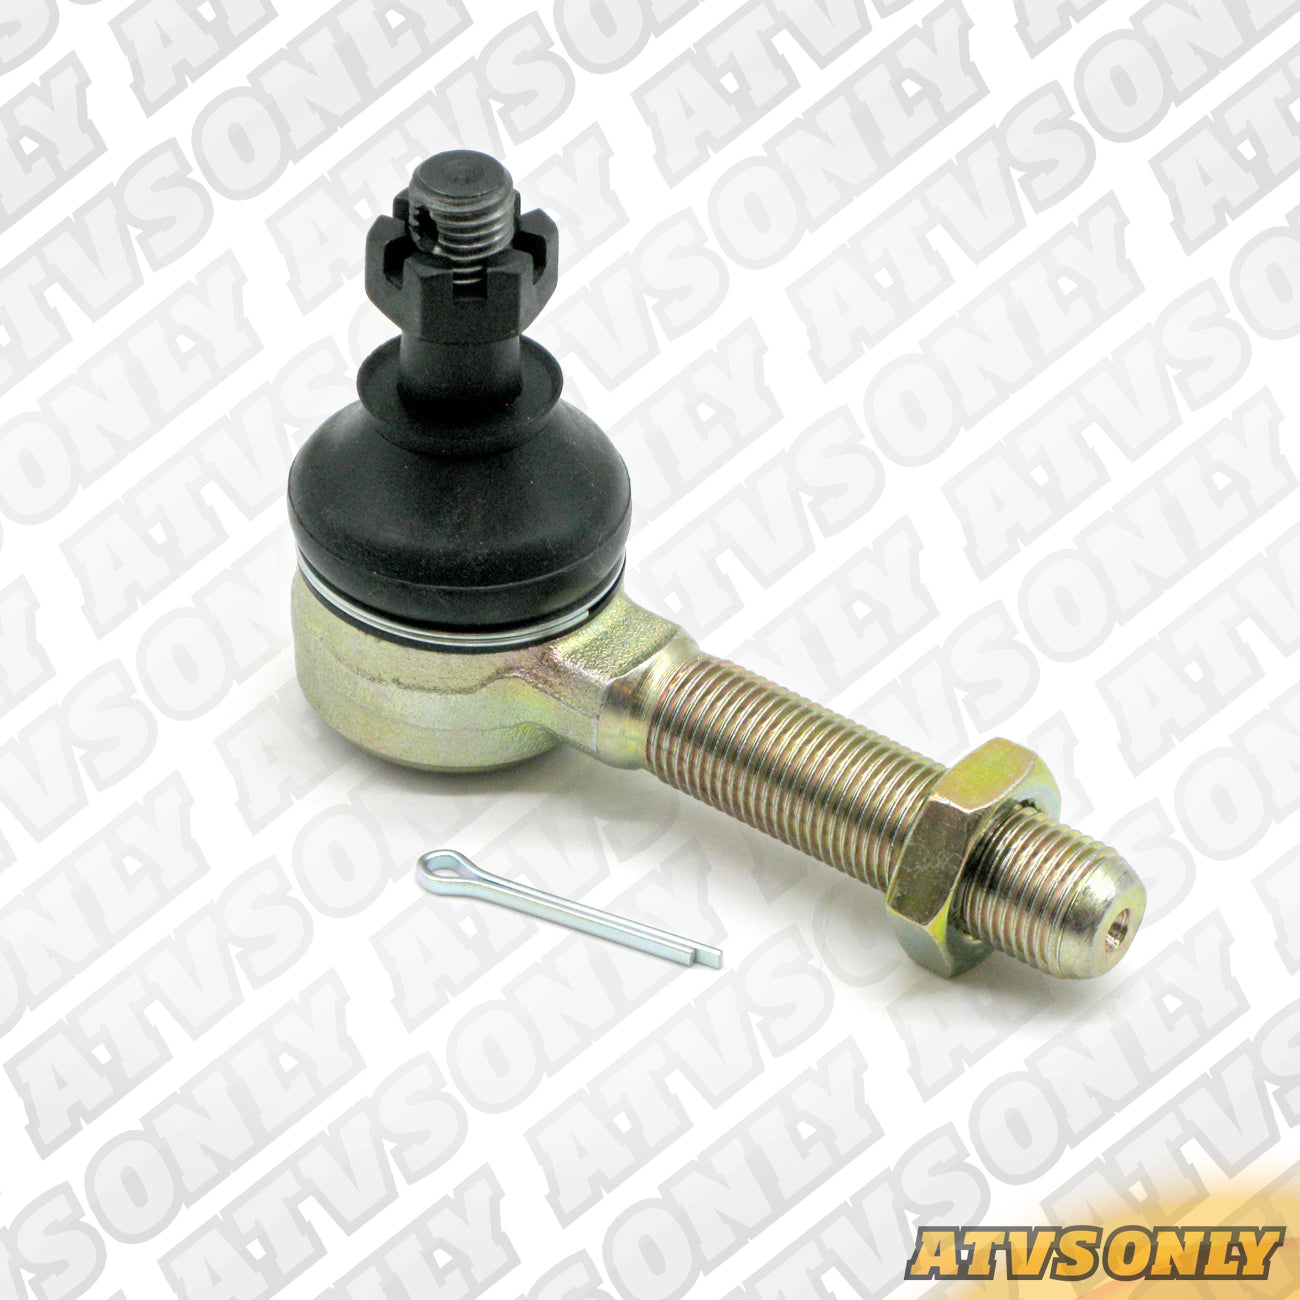 A-Arm Ball Joint (Goldspeed A-Arms-Lower) for Honda/Suzuki Applications